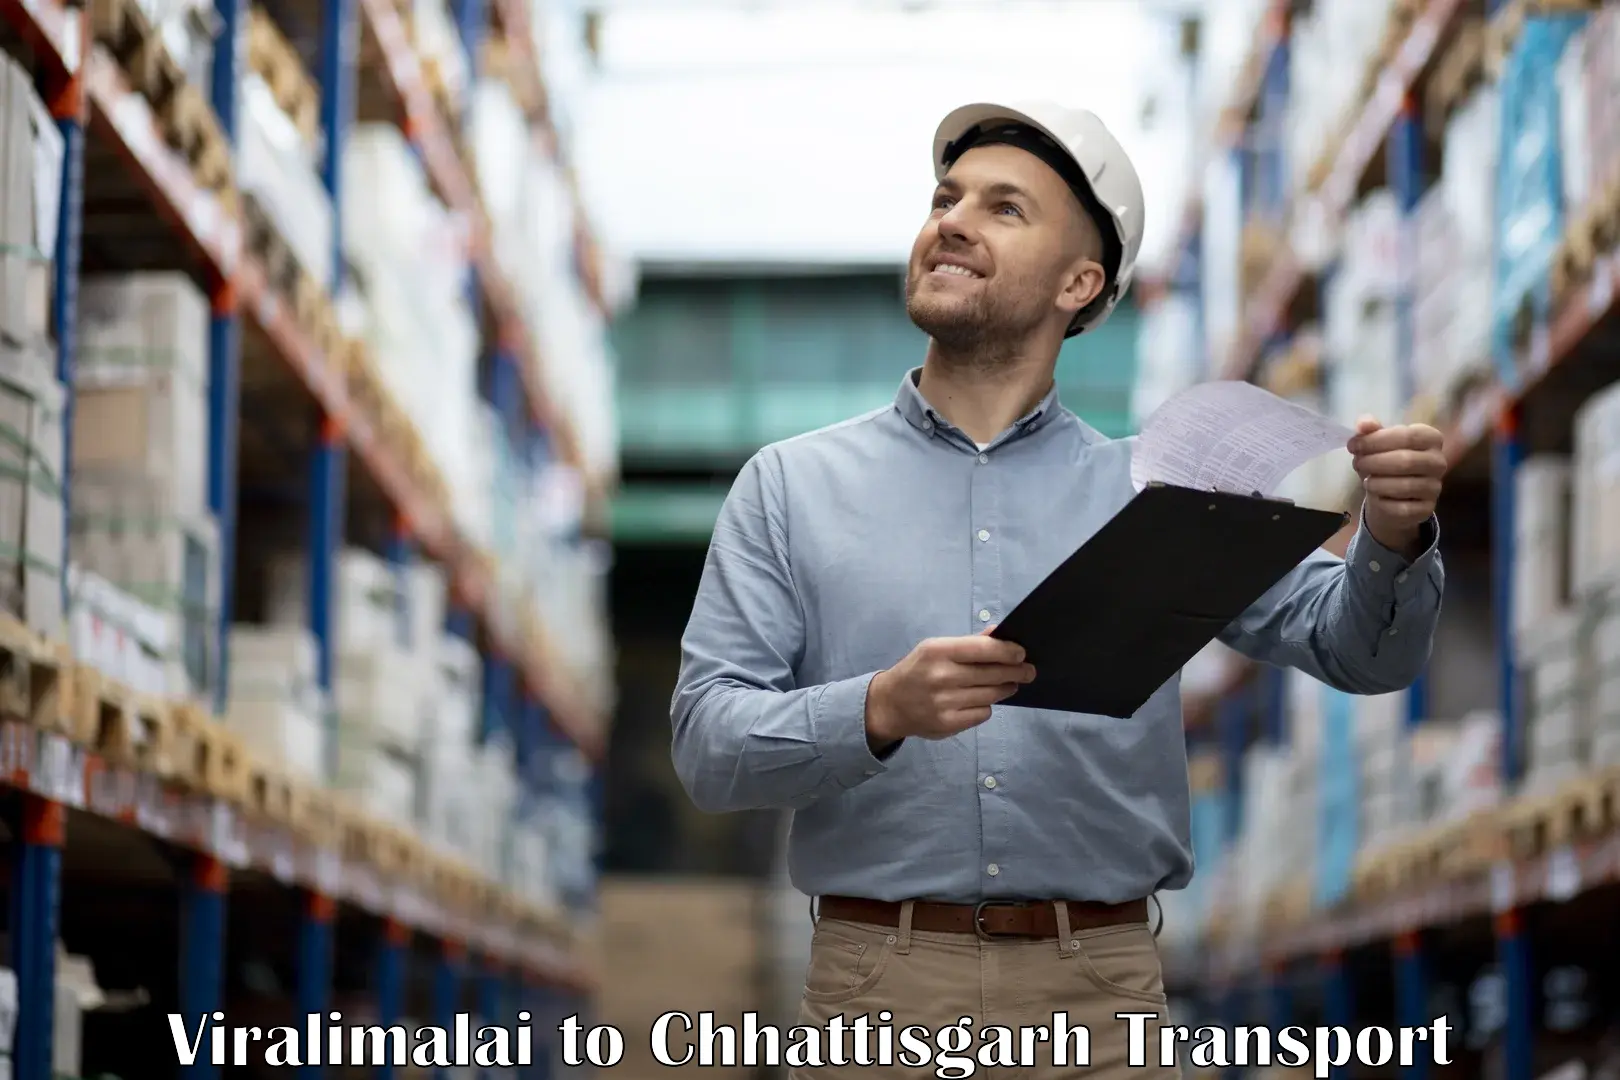 Goods delivery service Viralimalai to Raipur